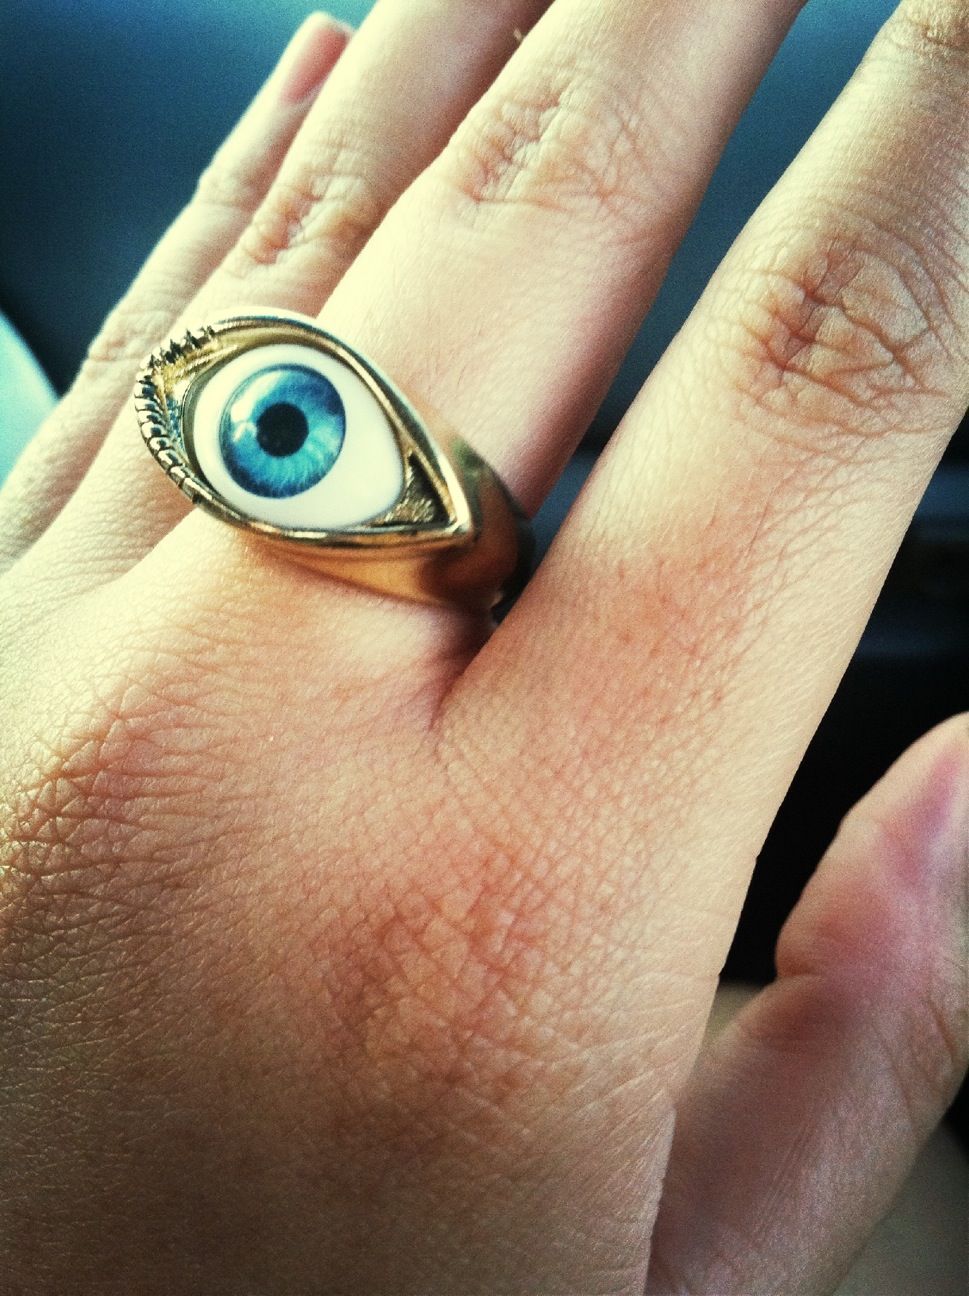 This scary eye ring ▲